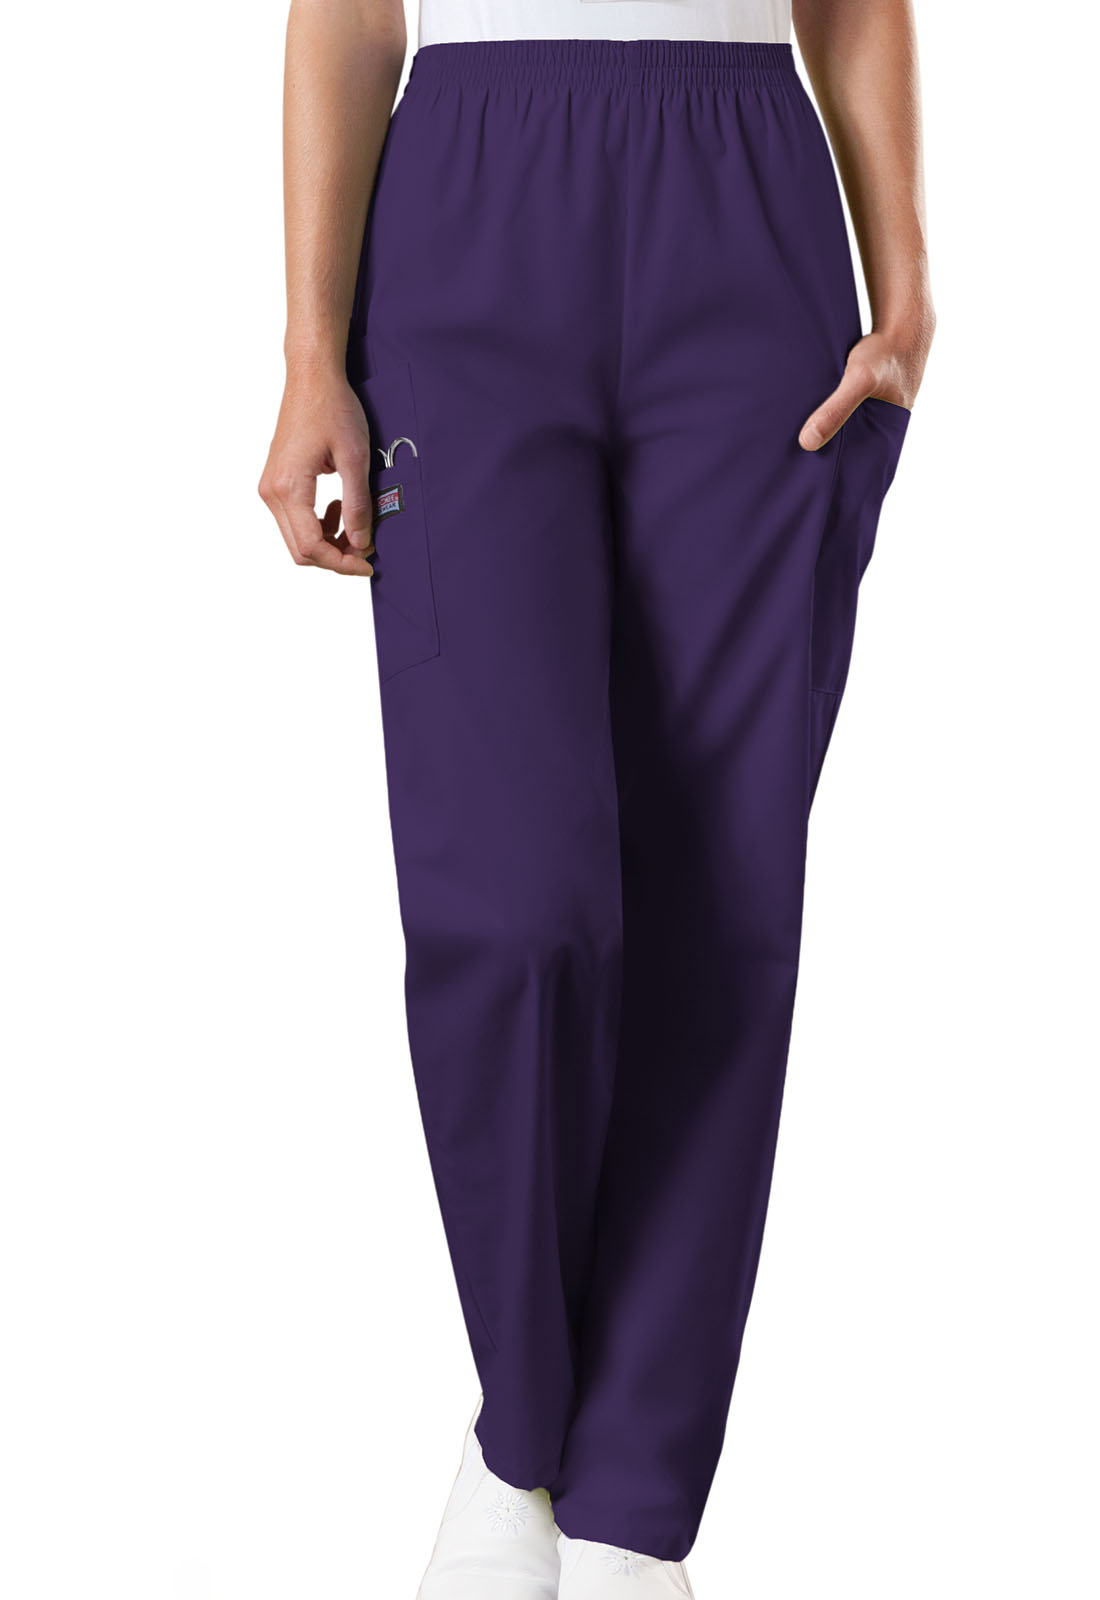 Orchid Cherokee 4001 Women's Natural Rise Tapered Pull-On Petite Scrub Pant 